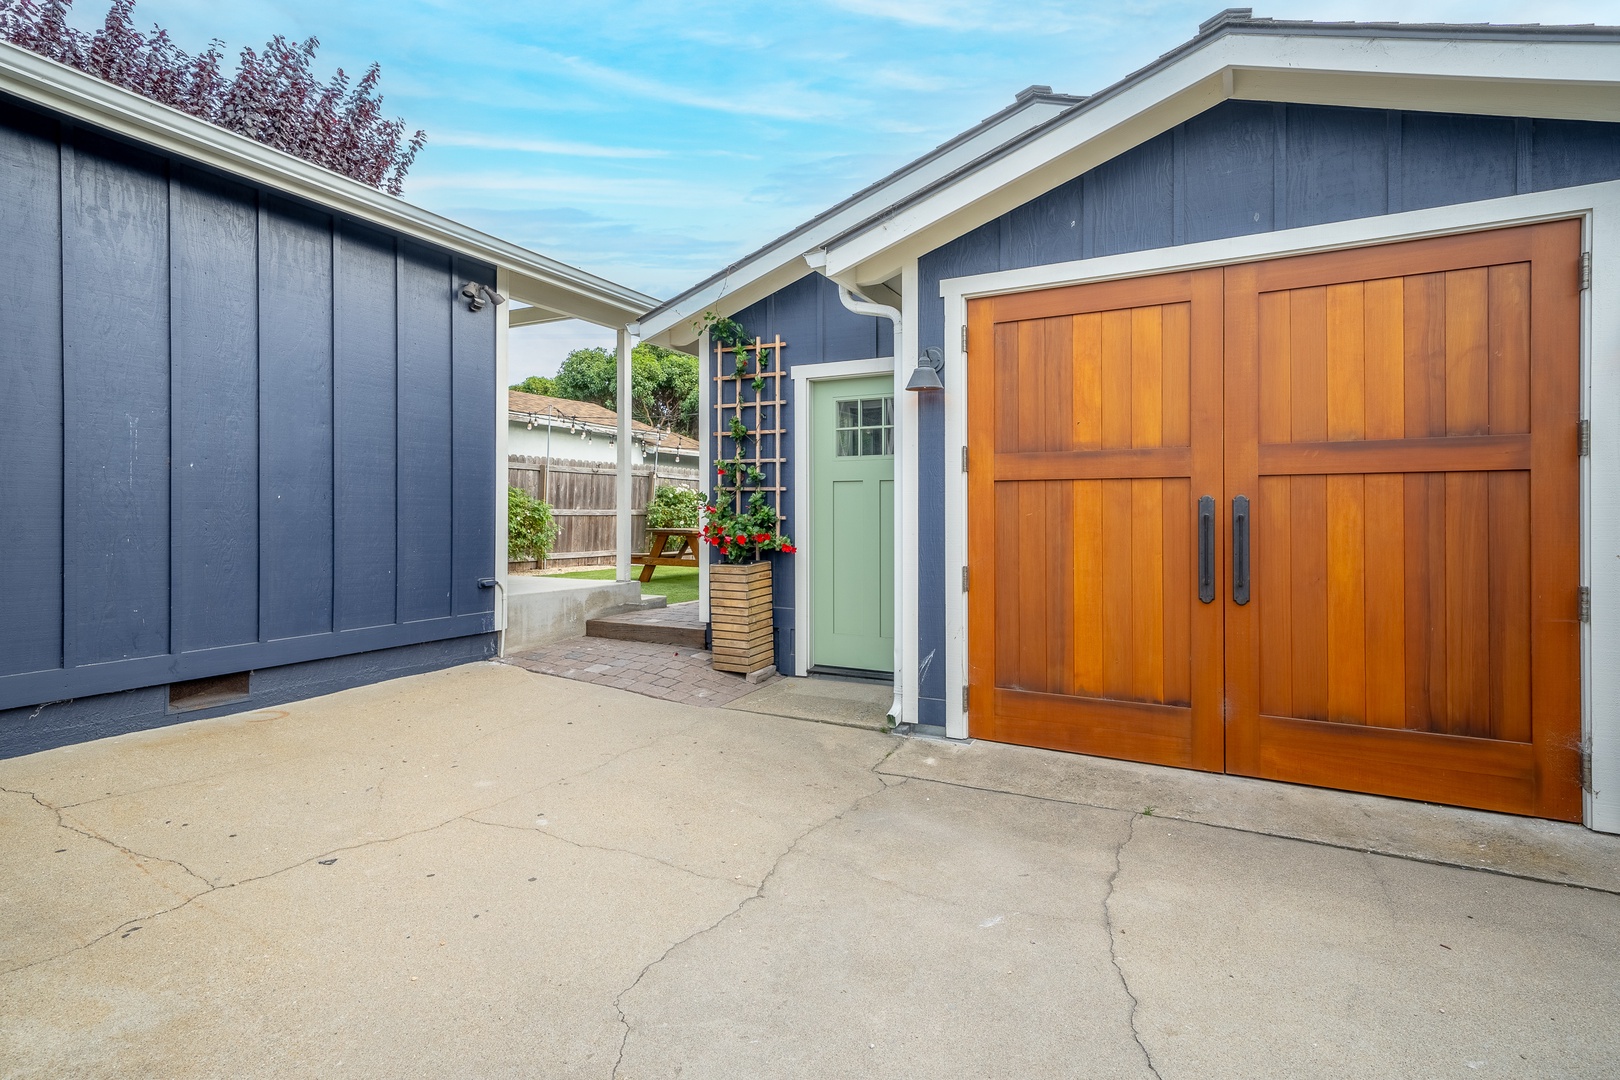 This charming home offers parking for up to 3 vehicles in the driveway